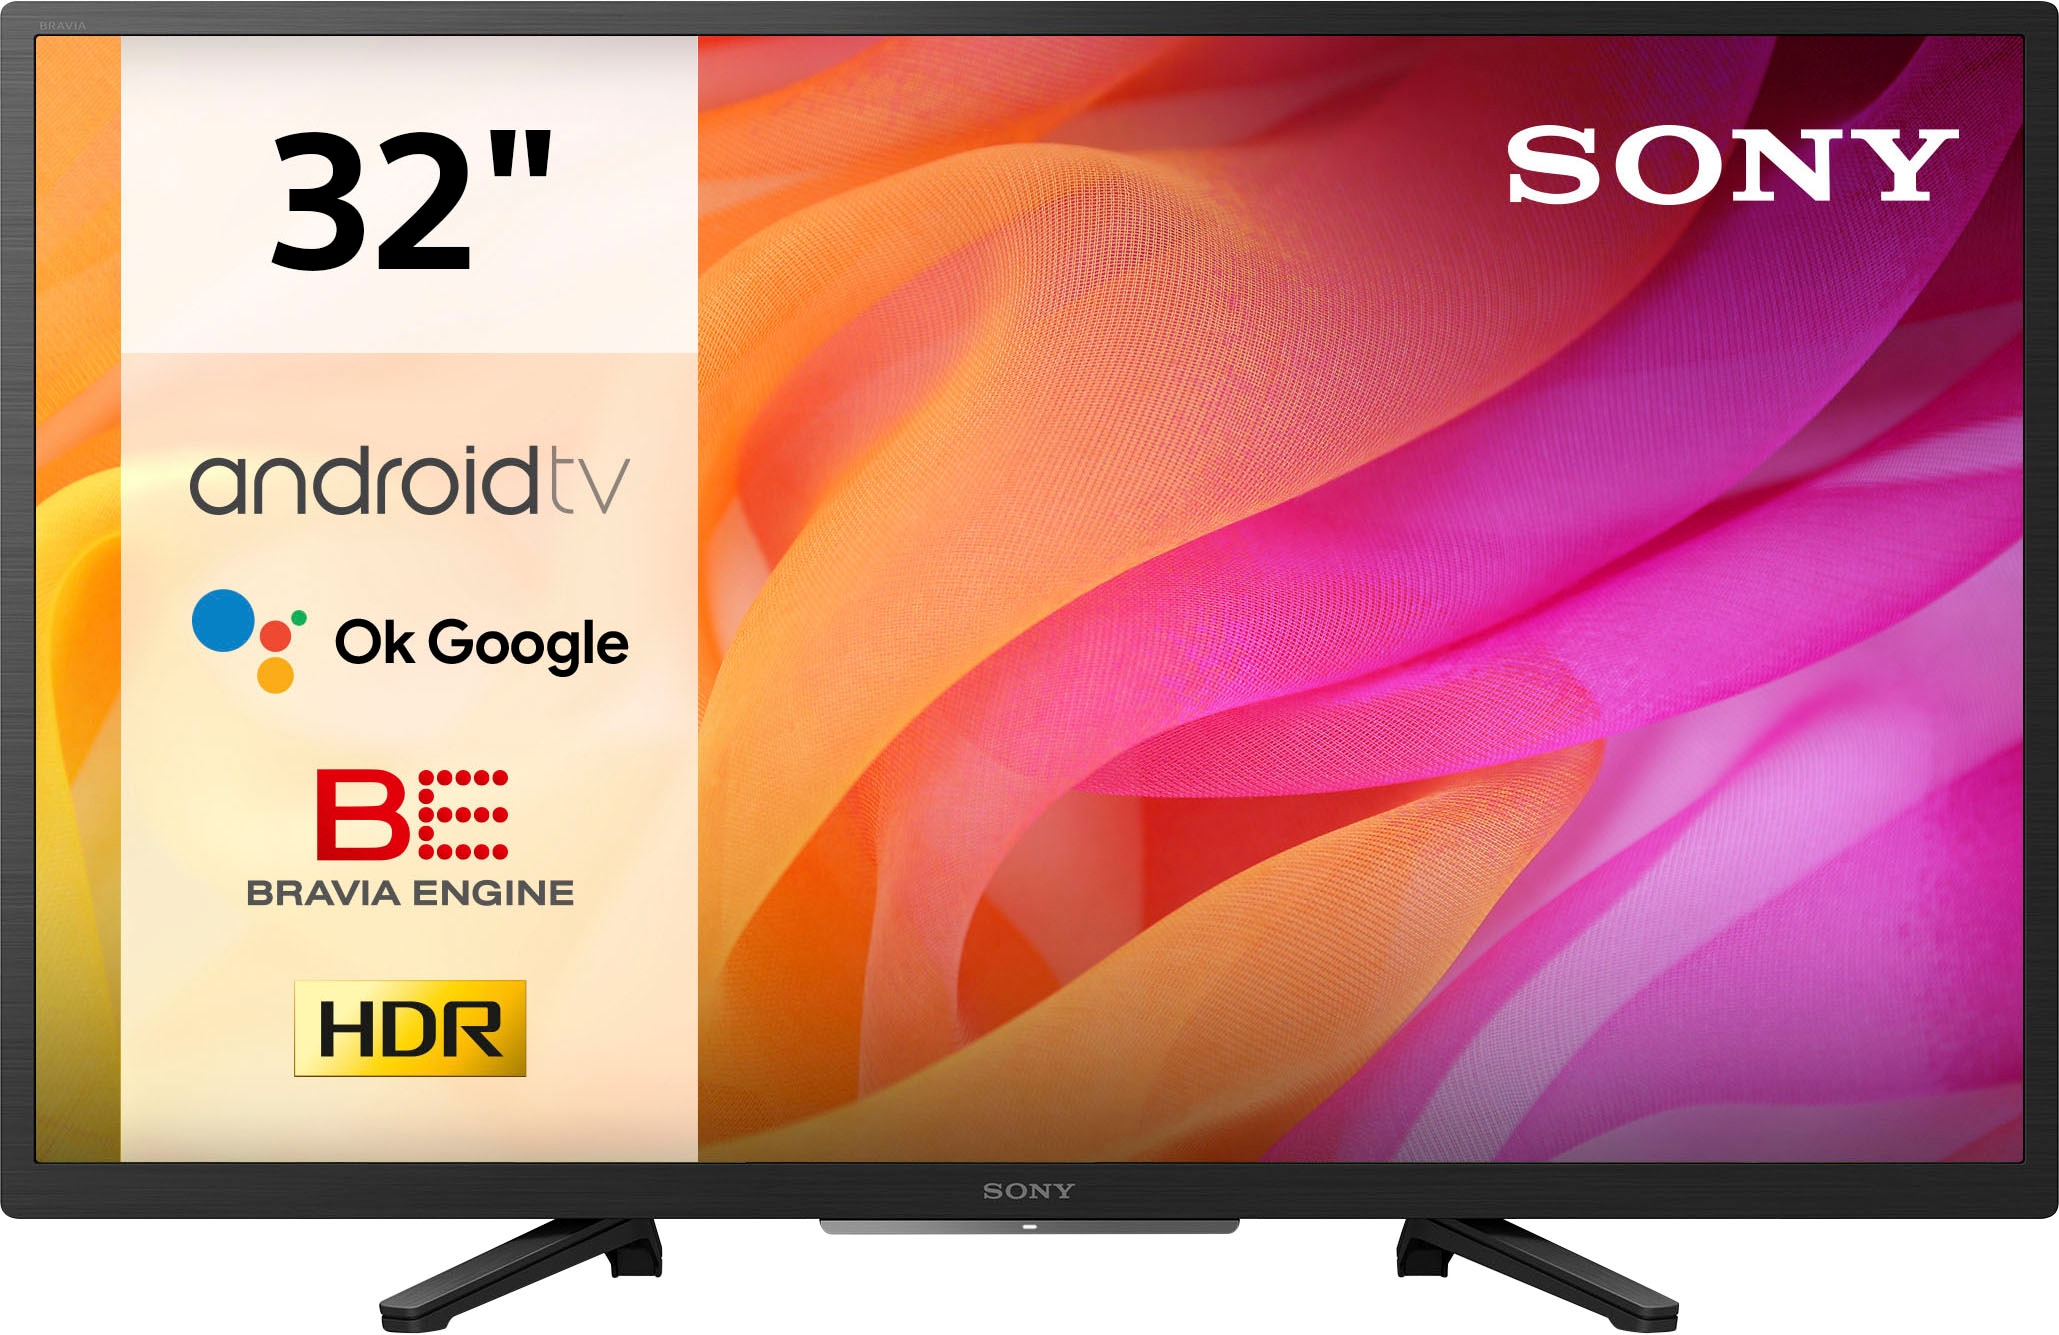 Sony LCD-LED Fernseher »KD-32800W/1«, 80 cm/32 Zoll, WXGA, Android TV,  BRAVIA, HD Heady, Smart TV, Triple Tuner, HDR jetzt bei OTTO